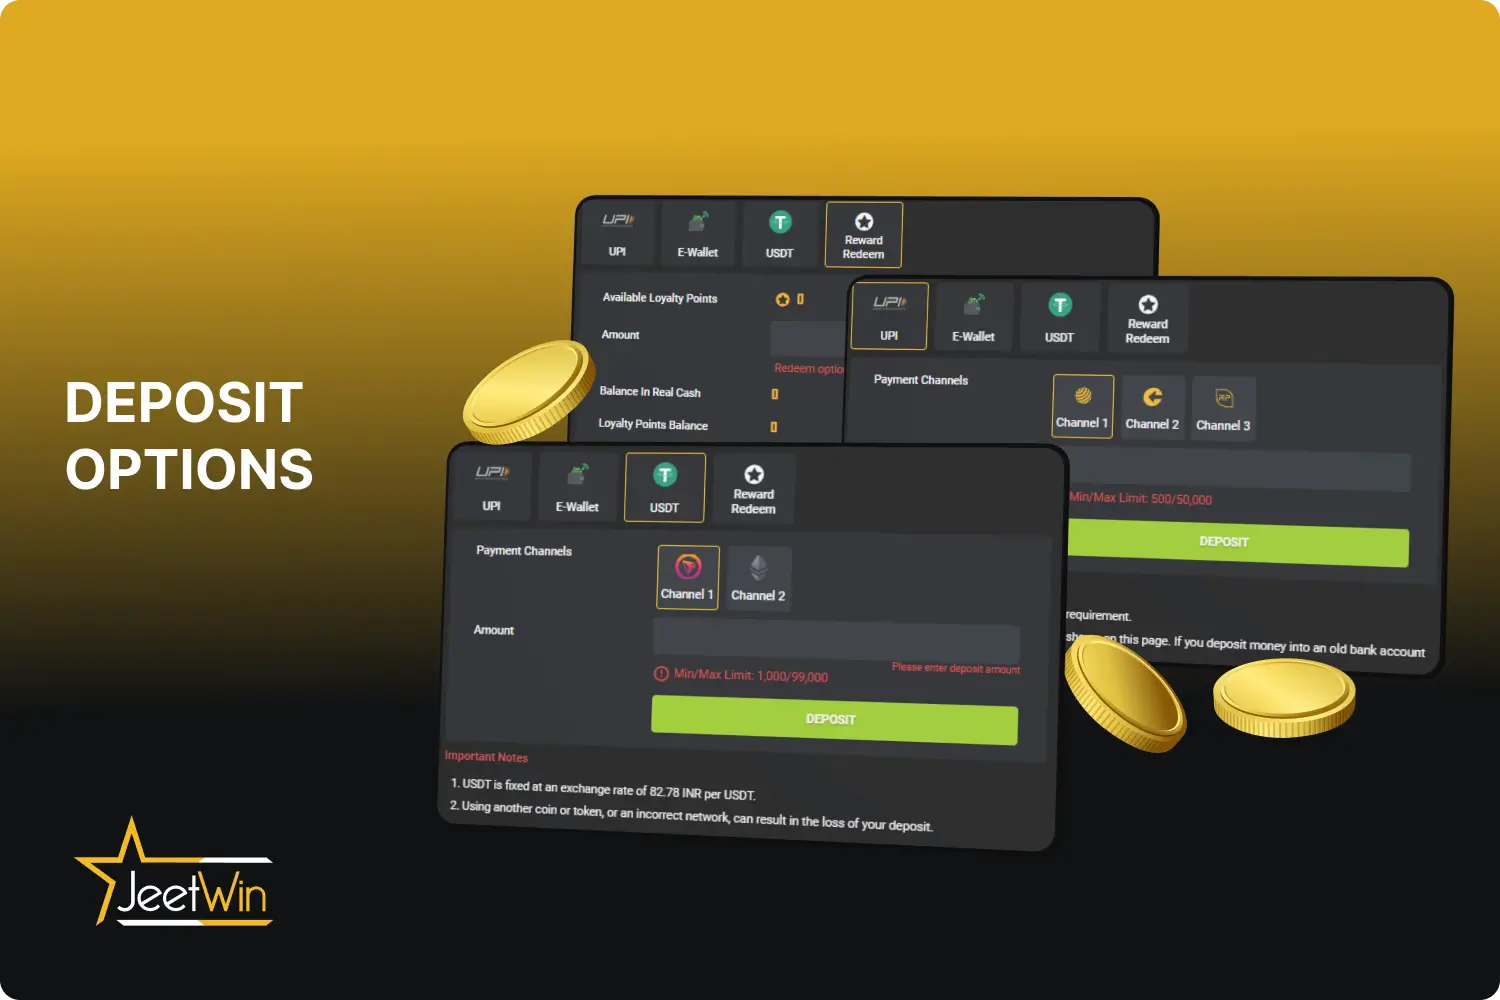 Jeetwin provides various deposit options for gamblers in India